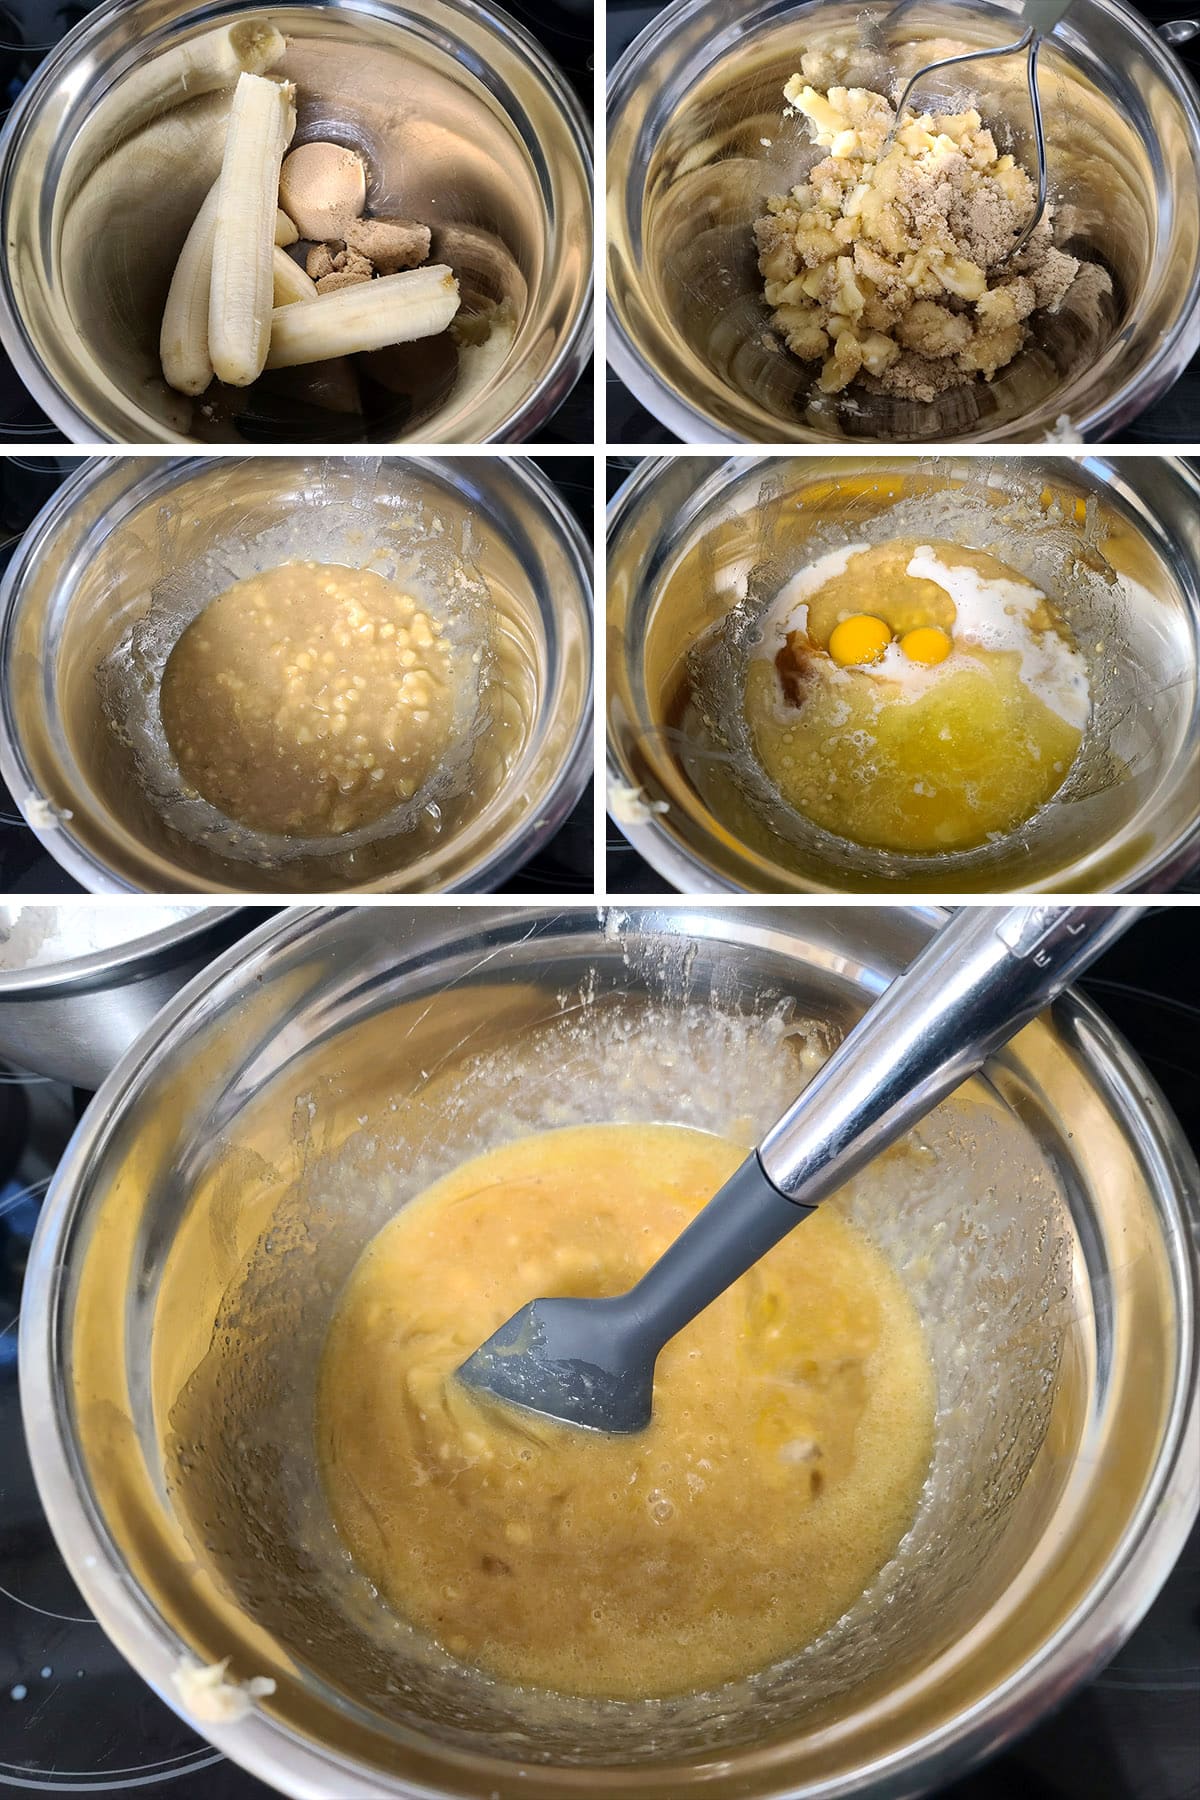 A 5 part image showing the bananas and brown sugar being mashed together, then mixed with the rest of the wet ingredients.